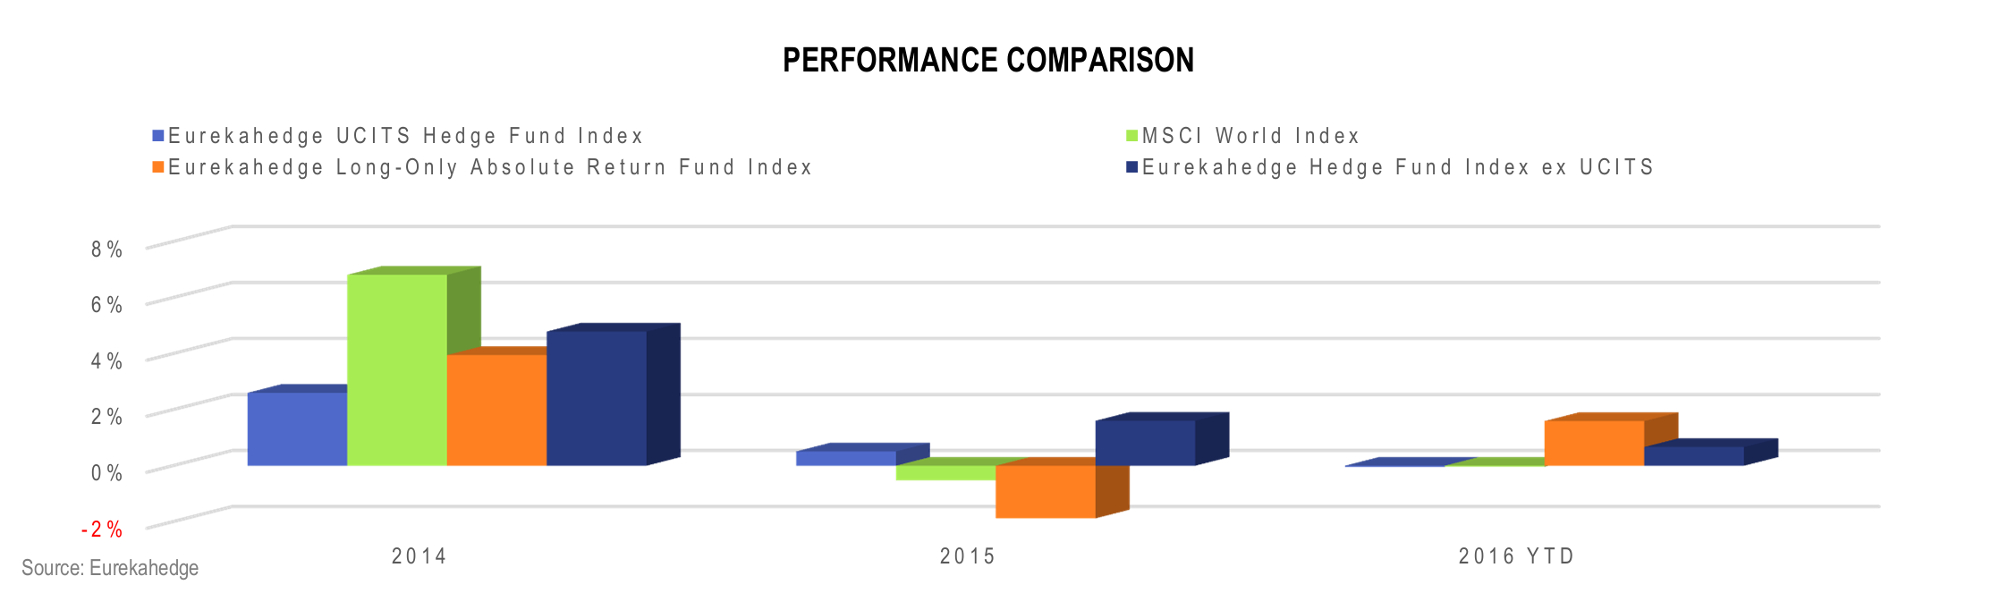 UCITS Hedge Funds Infographic July 2016 - Performance comparison